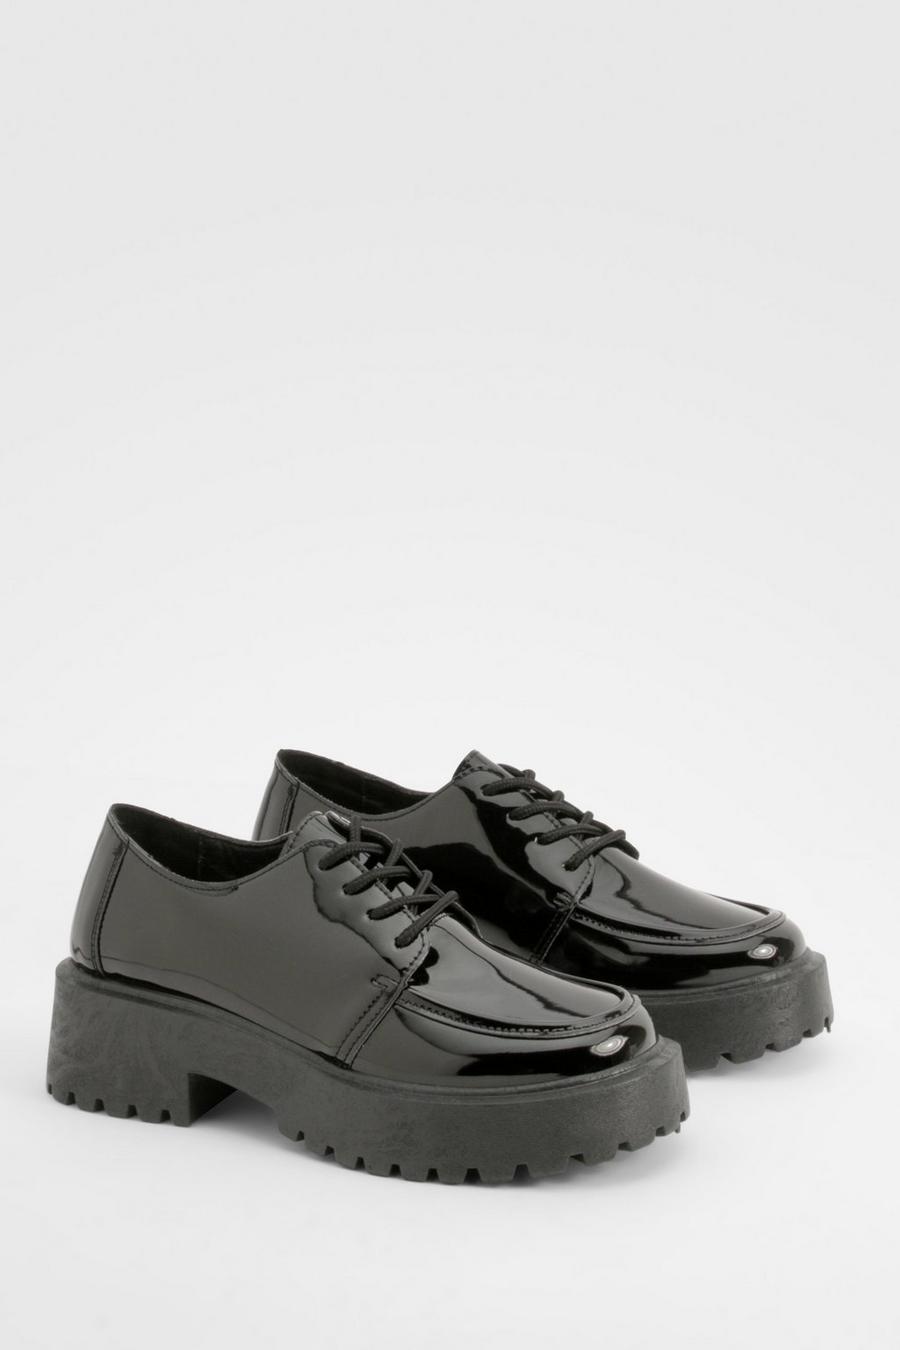 Black Patent  Lace Up Chunky Sole the Shoes